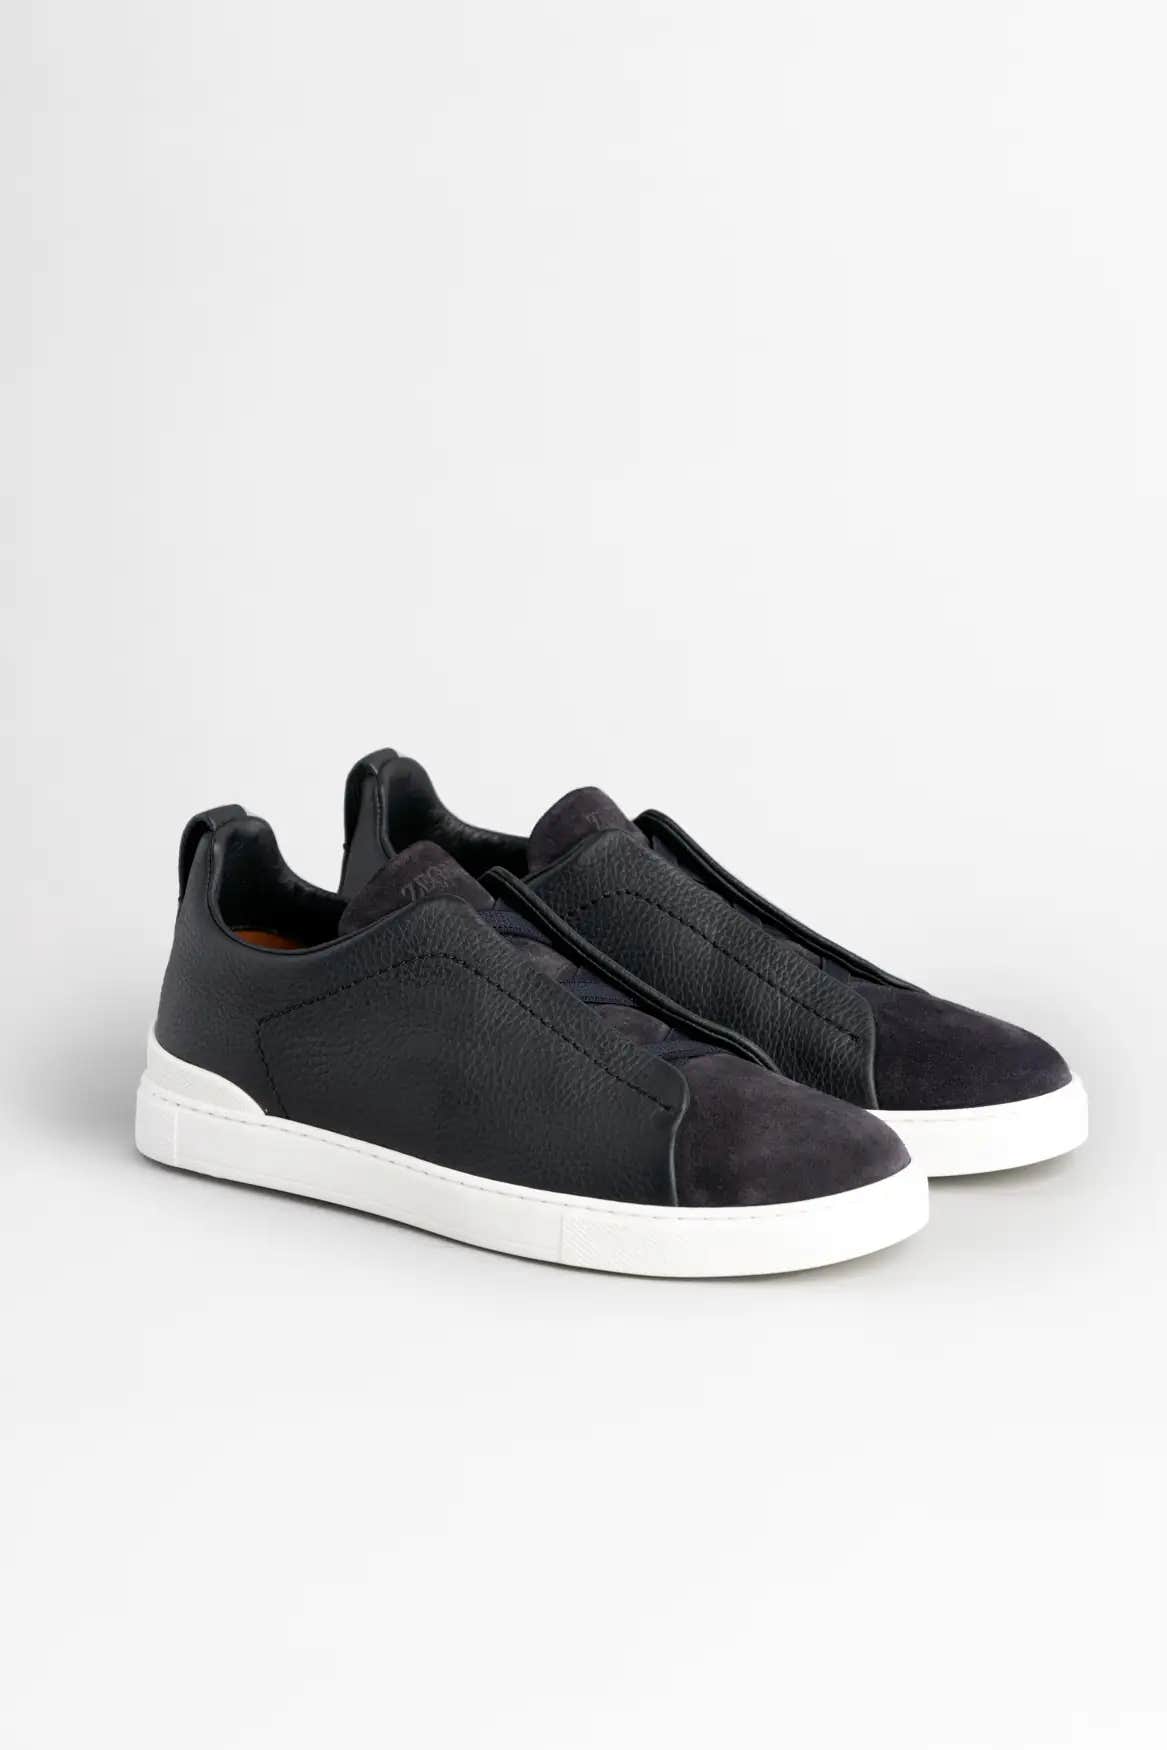 ZEGNA Navy grained leather and sued triple stitch sneakers on a white background